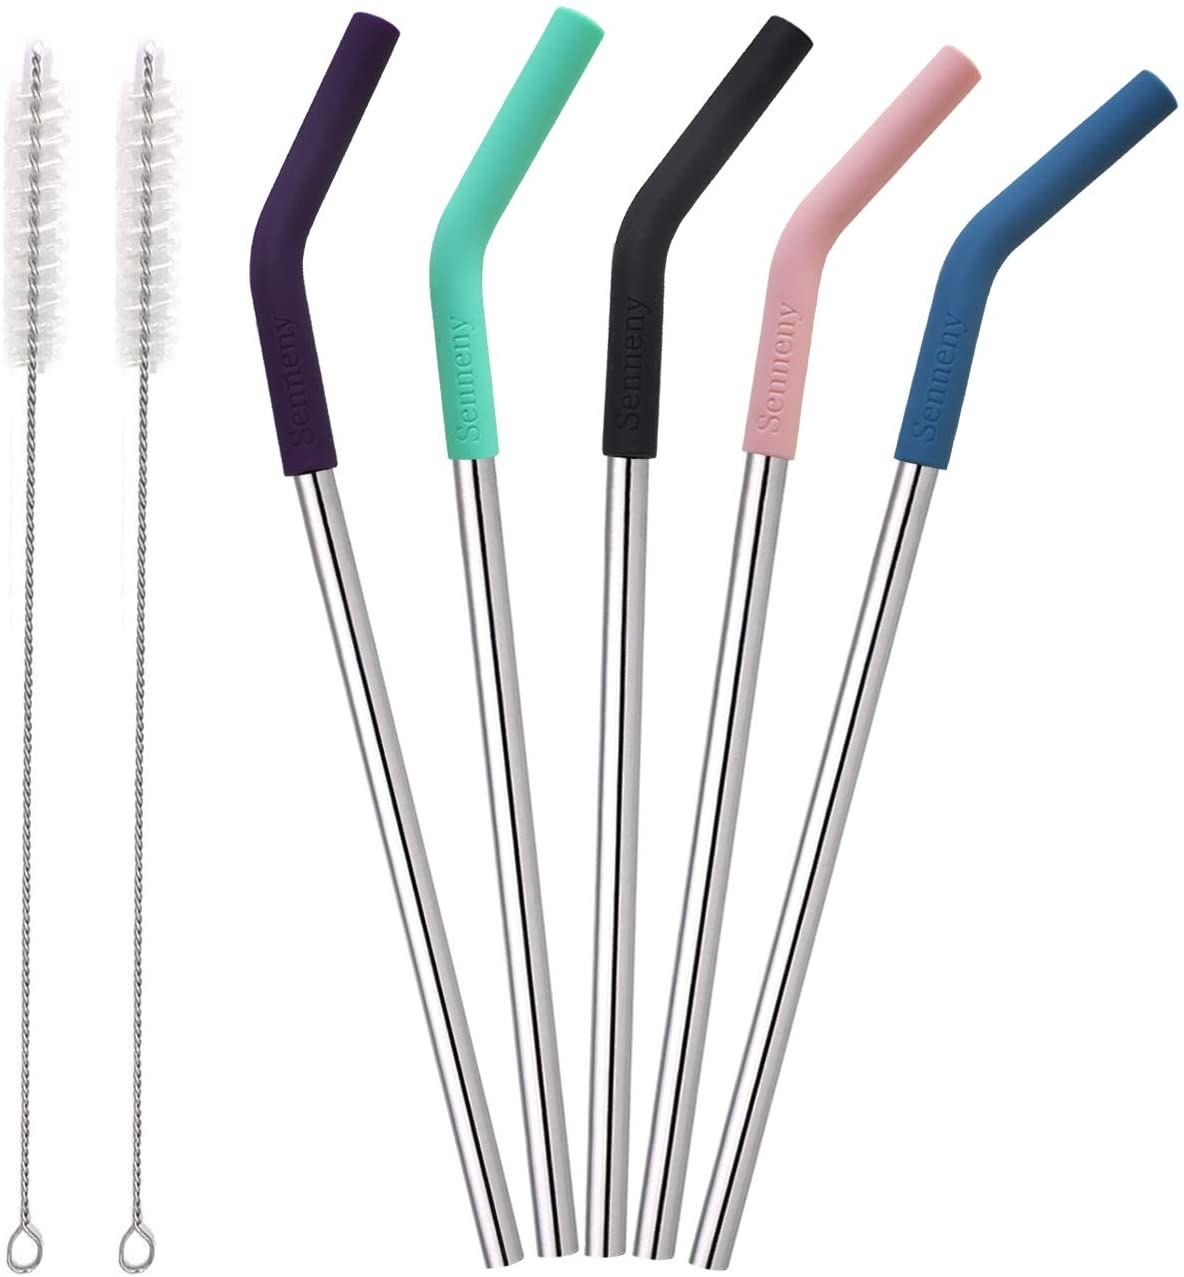 Five stainless steel straws with purple, aqua, black, pink, and blue silicone tops and two cleaning brushes